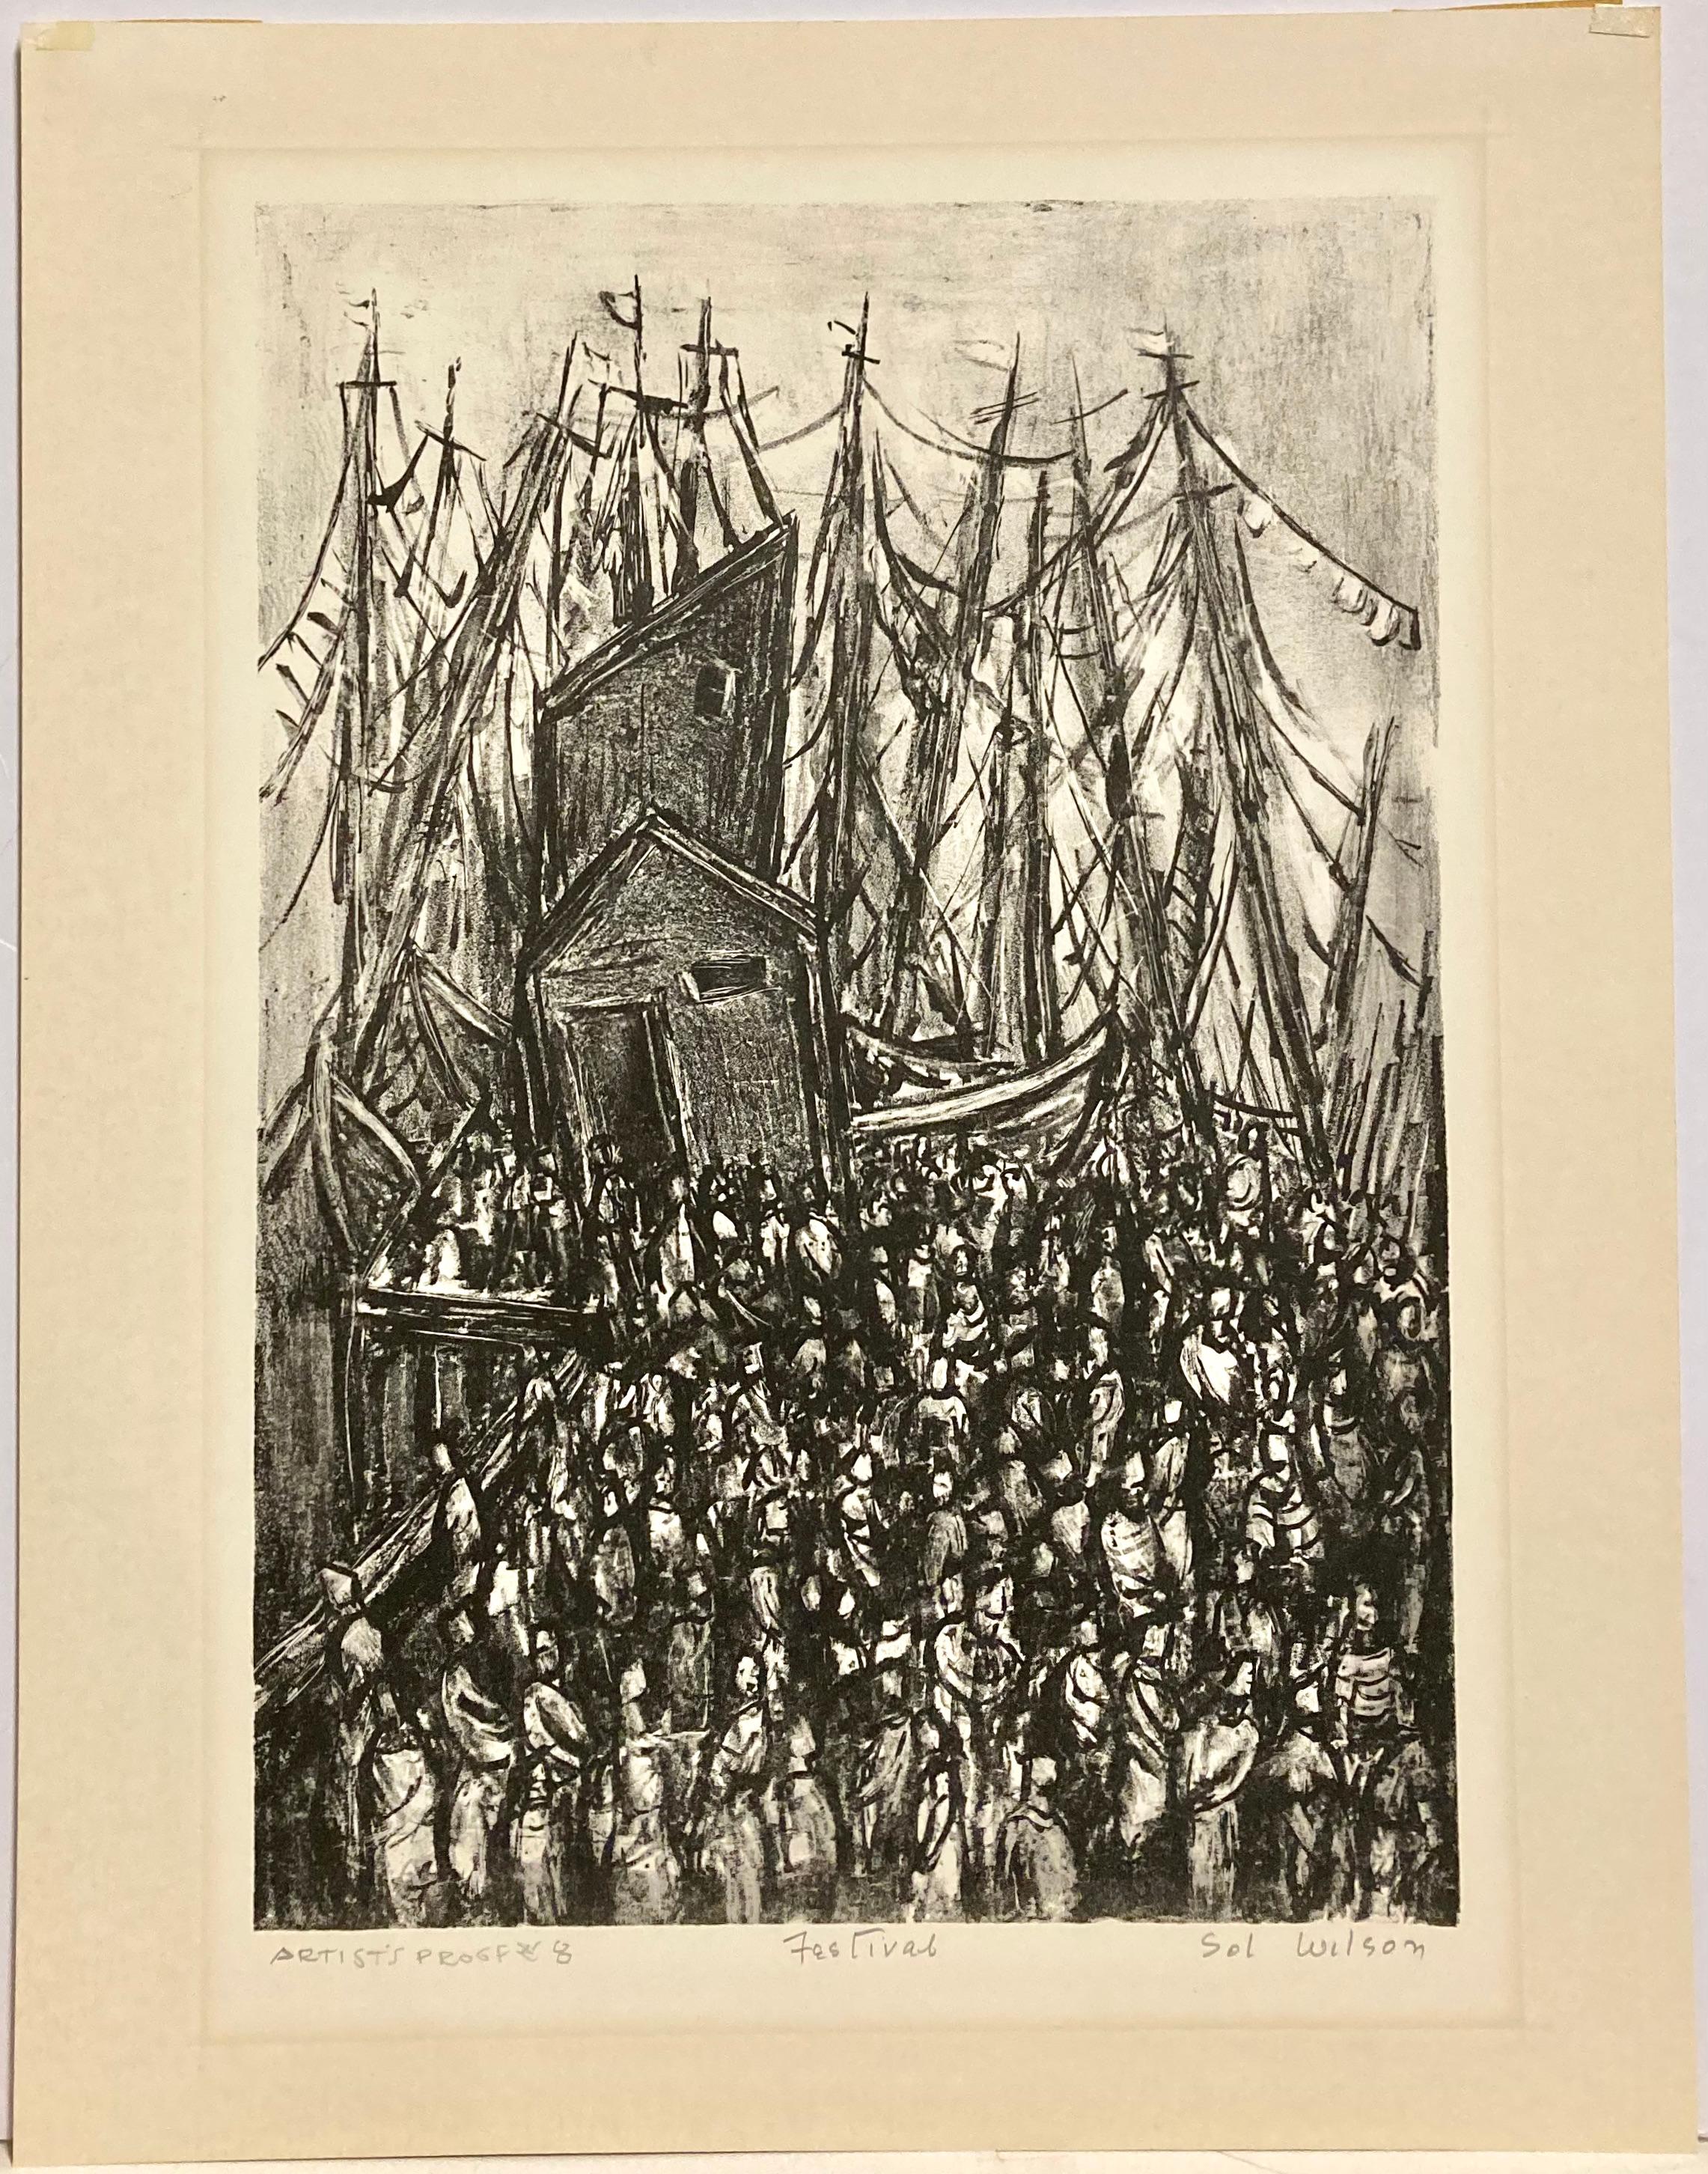 Wilson lived in New York City and spent summers in Provincetown, Cape Cod, Massachusetts. There the 'Blessing of the Fleet' was an important event of the season. The crowds, the boats, and the flags, all contribute to the celebratory nature of this